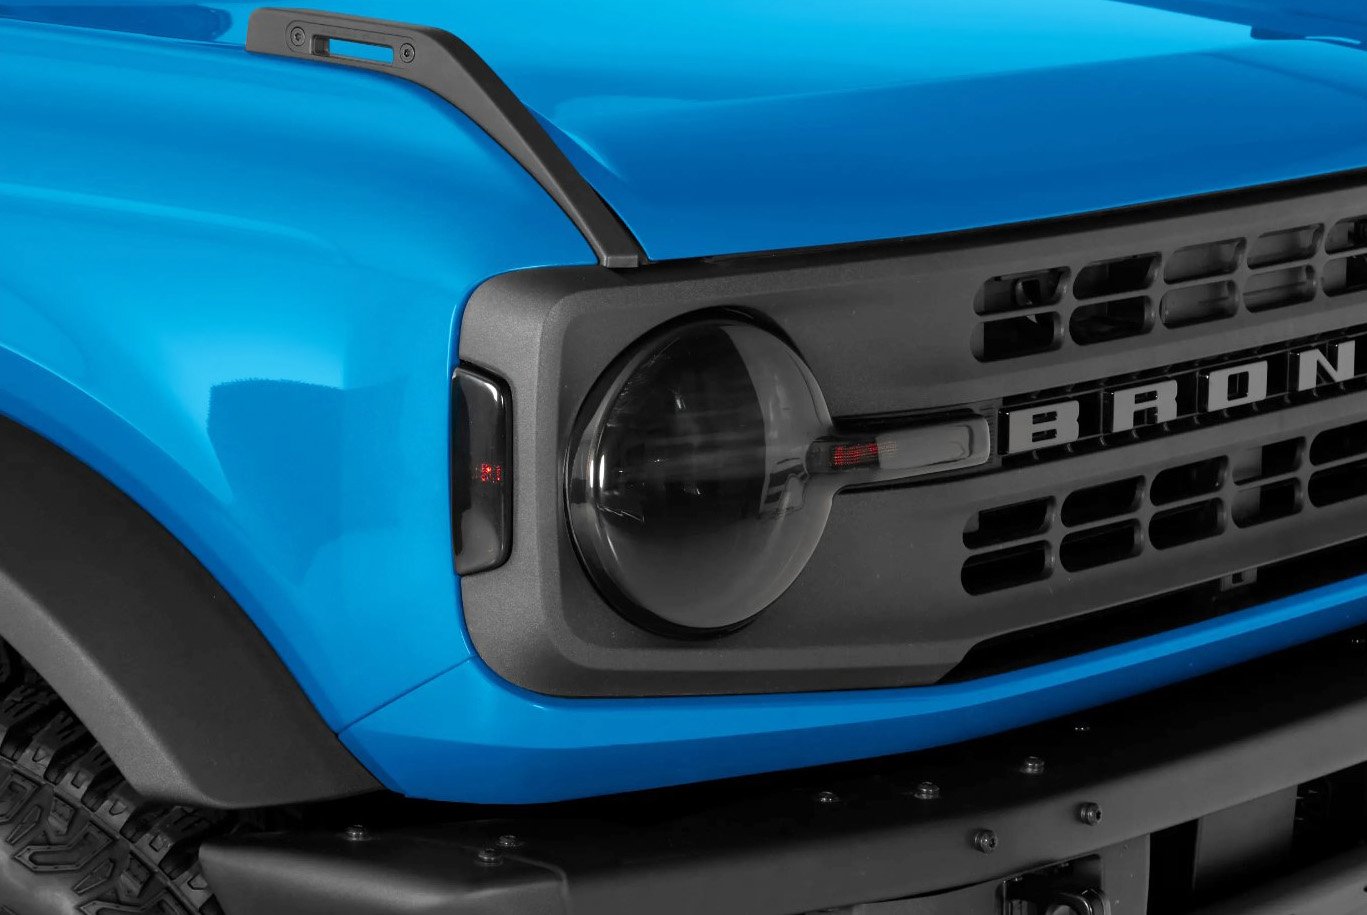 Smoked Headlight Cover Kit Fits Gen 6 Ford Bronco [non-LED]